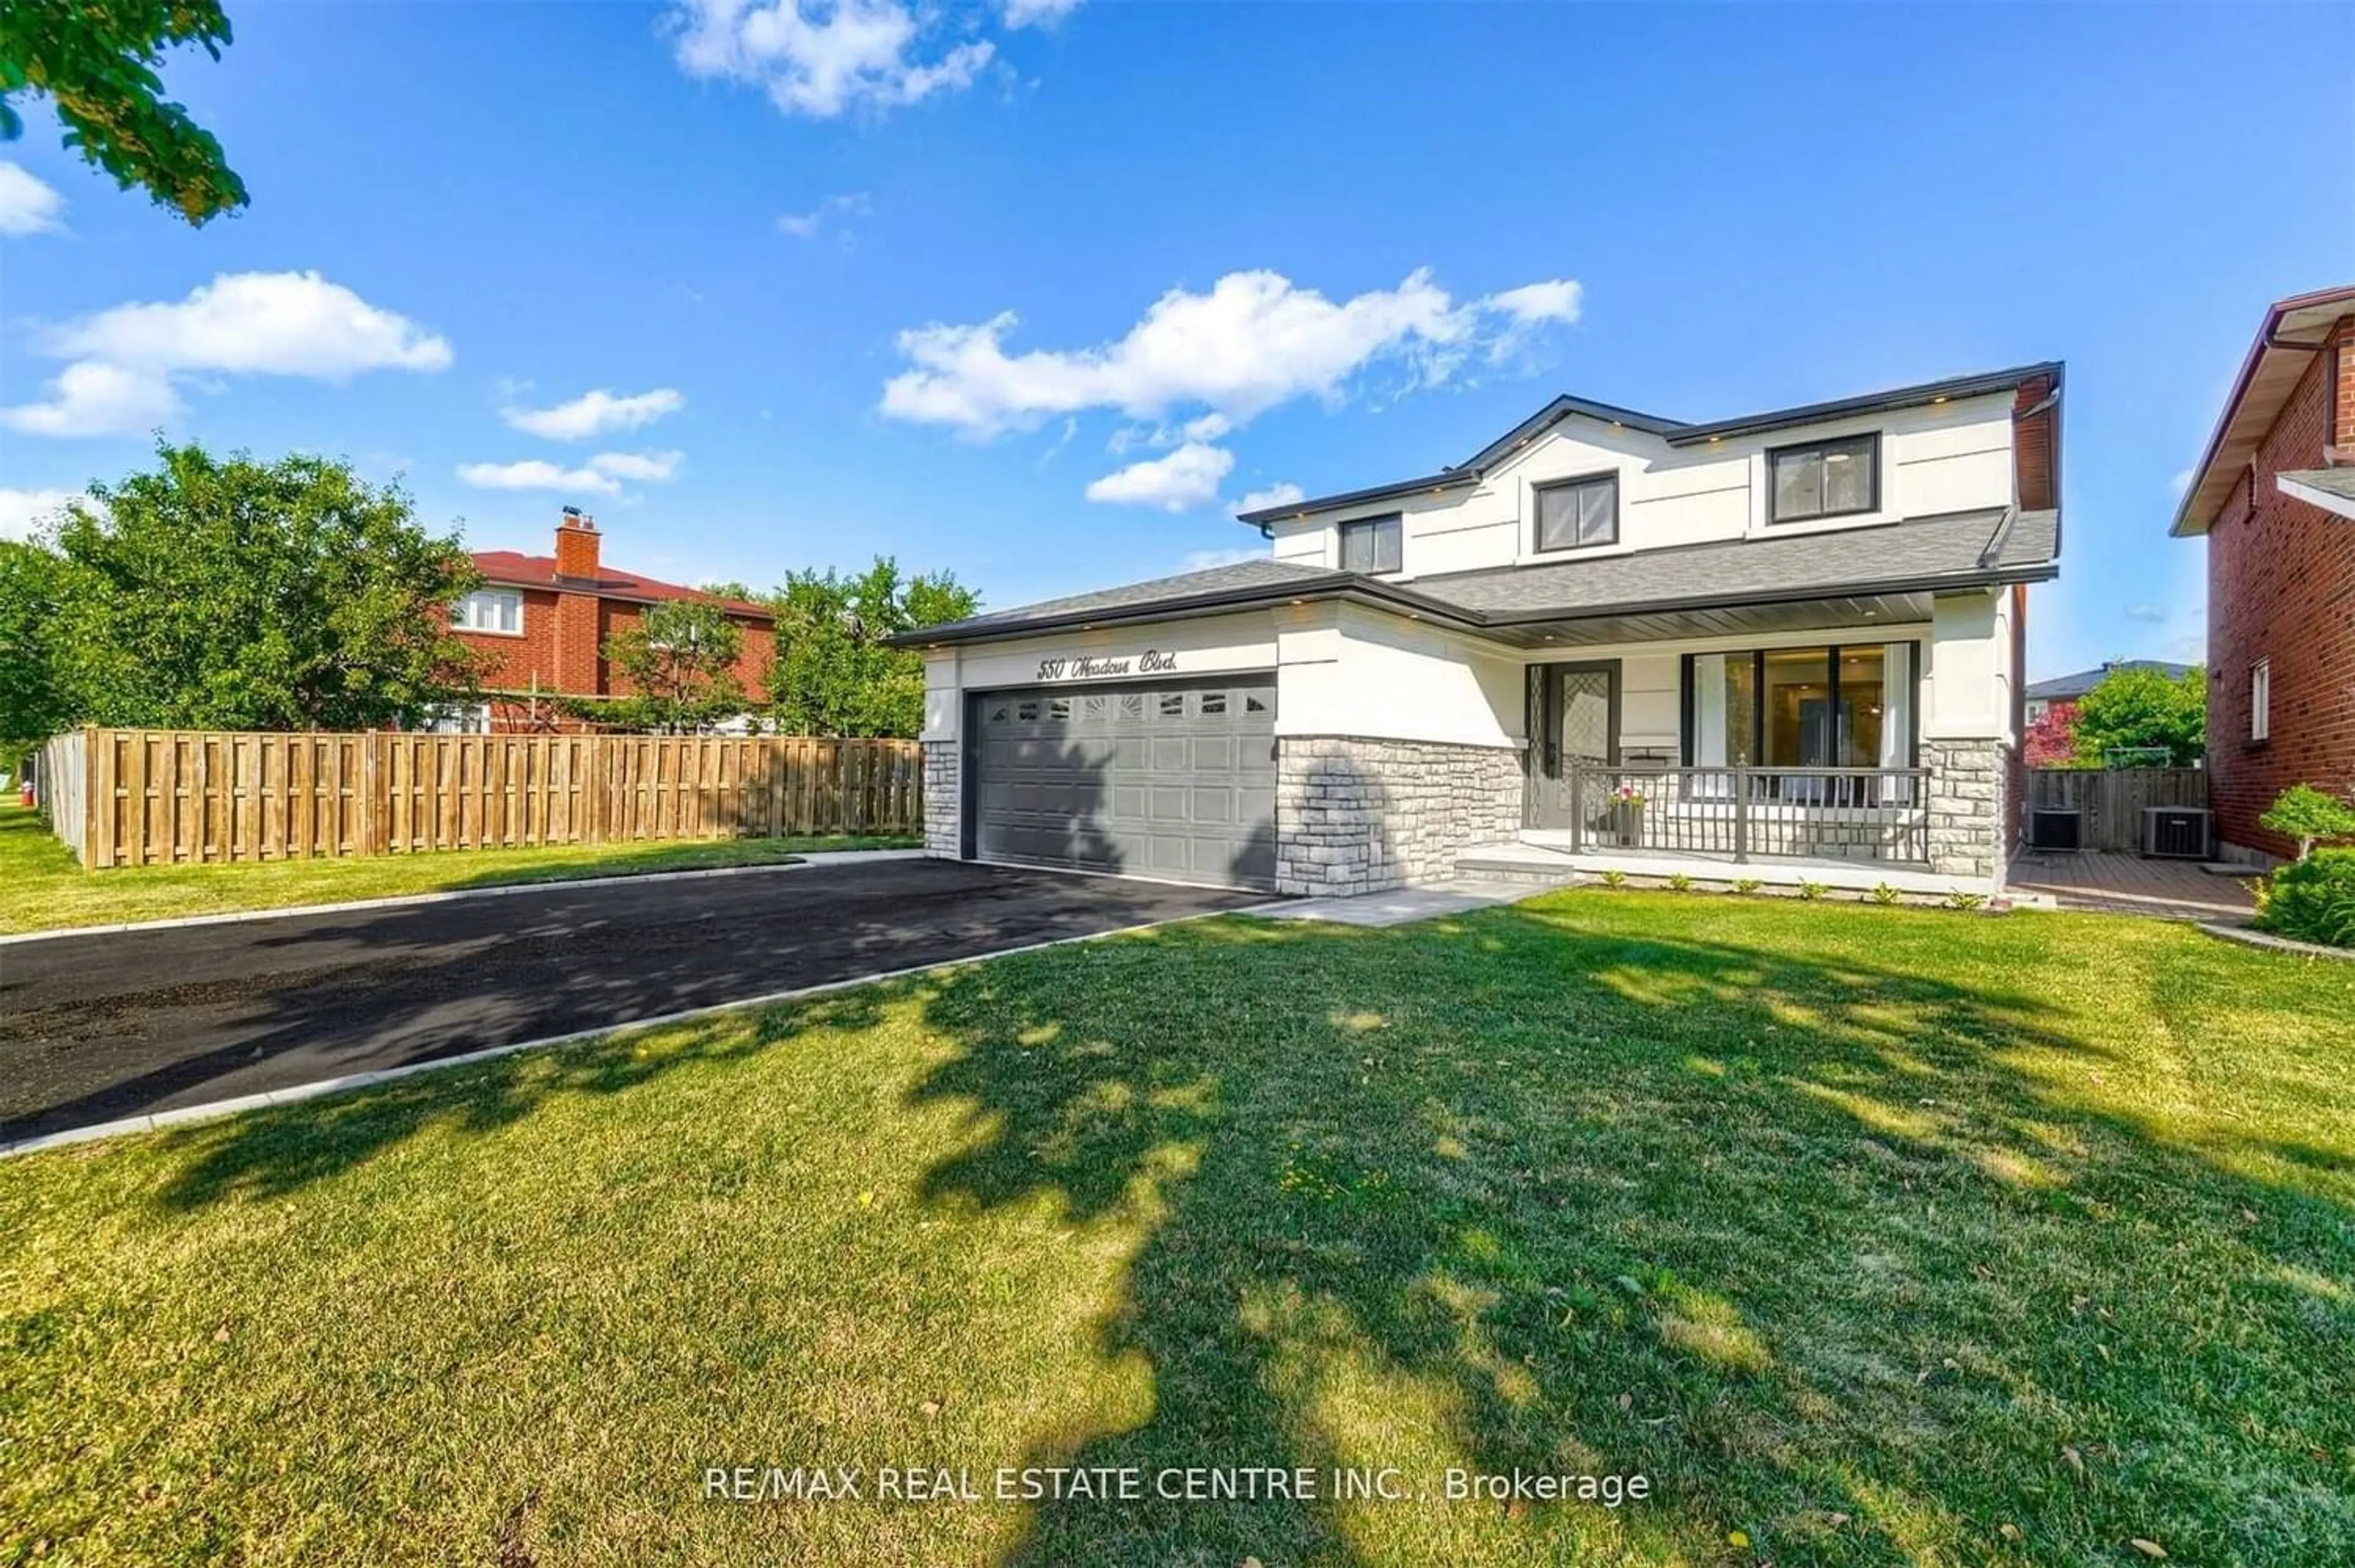 Frontside or backside of a home for 550 Meadows Blvd, Mississauga Ontario L4Z 1G6